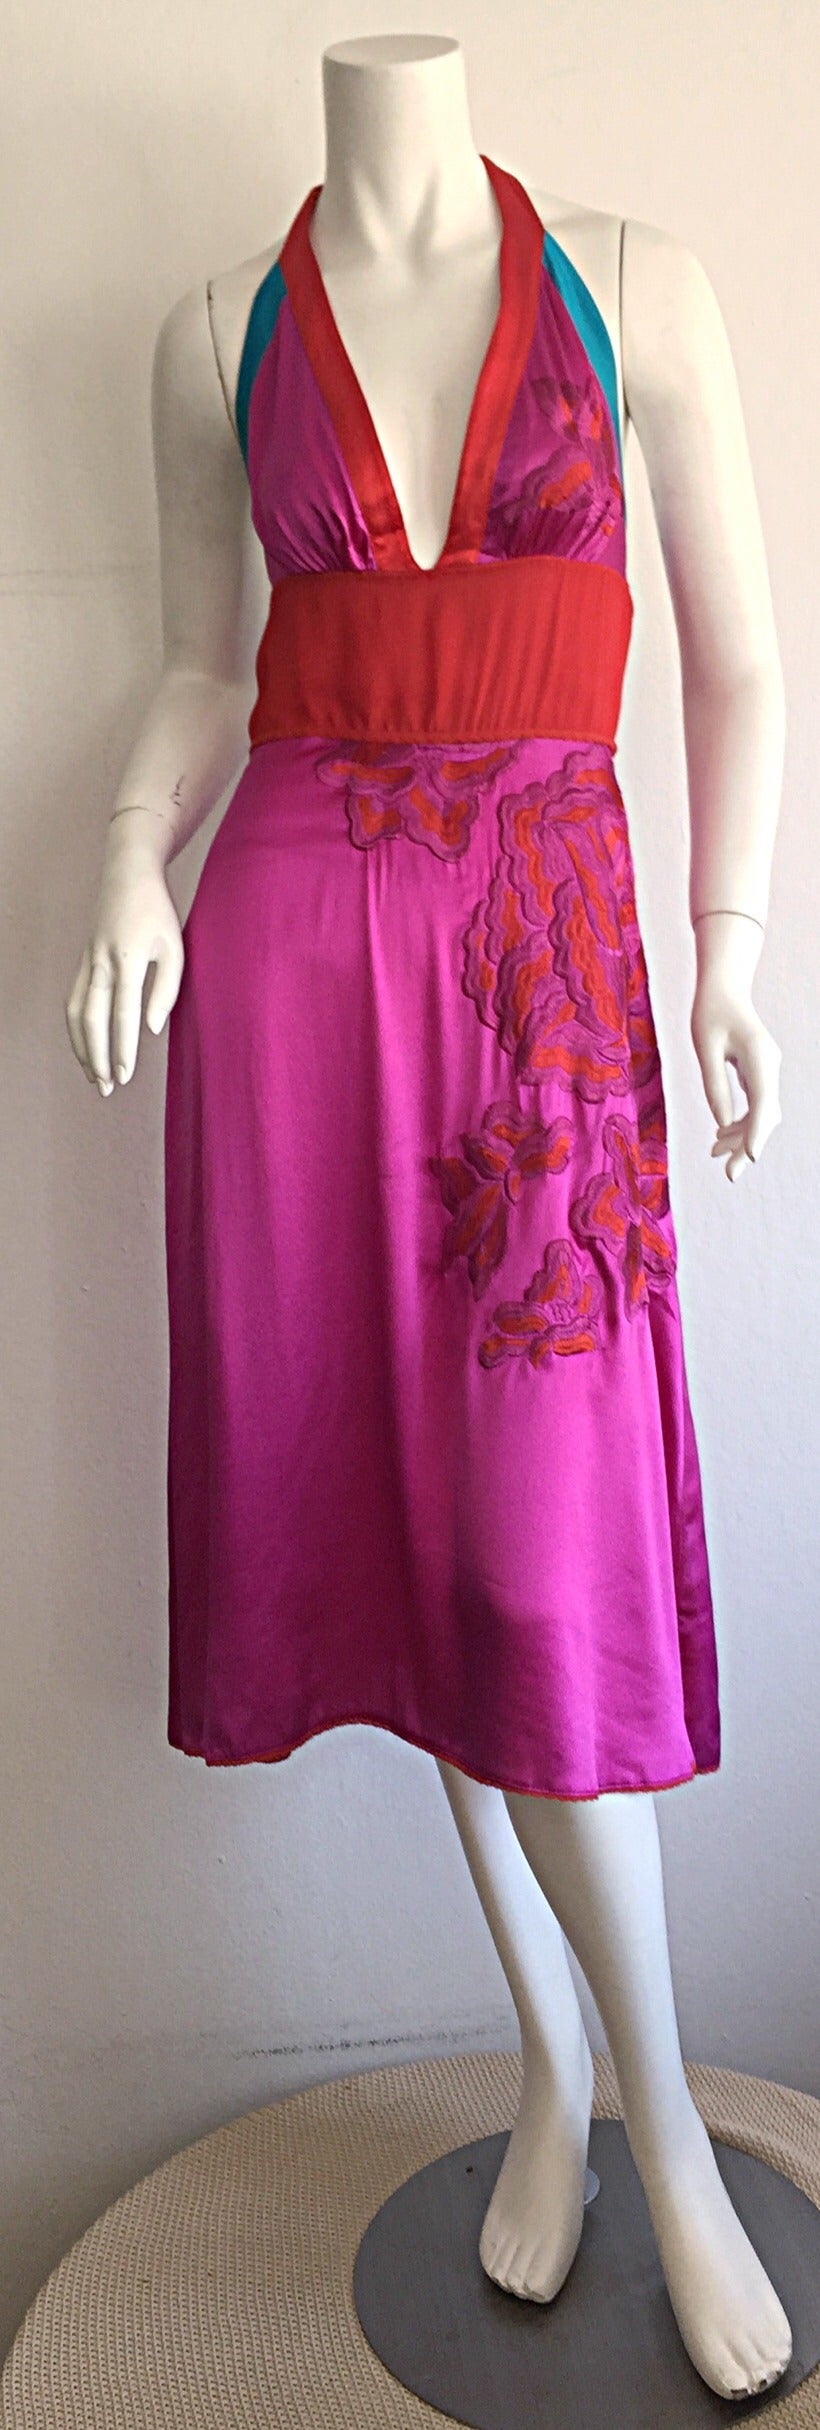 Wonderful sexy Gianfranco Ferre silk dress! Hot pink color, with trims in red and blue, that make for a glorious combination! Intricate red floral embroidery on side of skirt, which drips into the bust. Ties at neck, and back, making this perfect